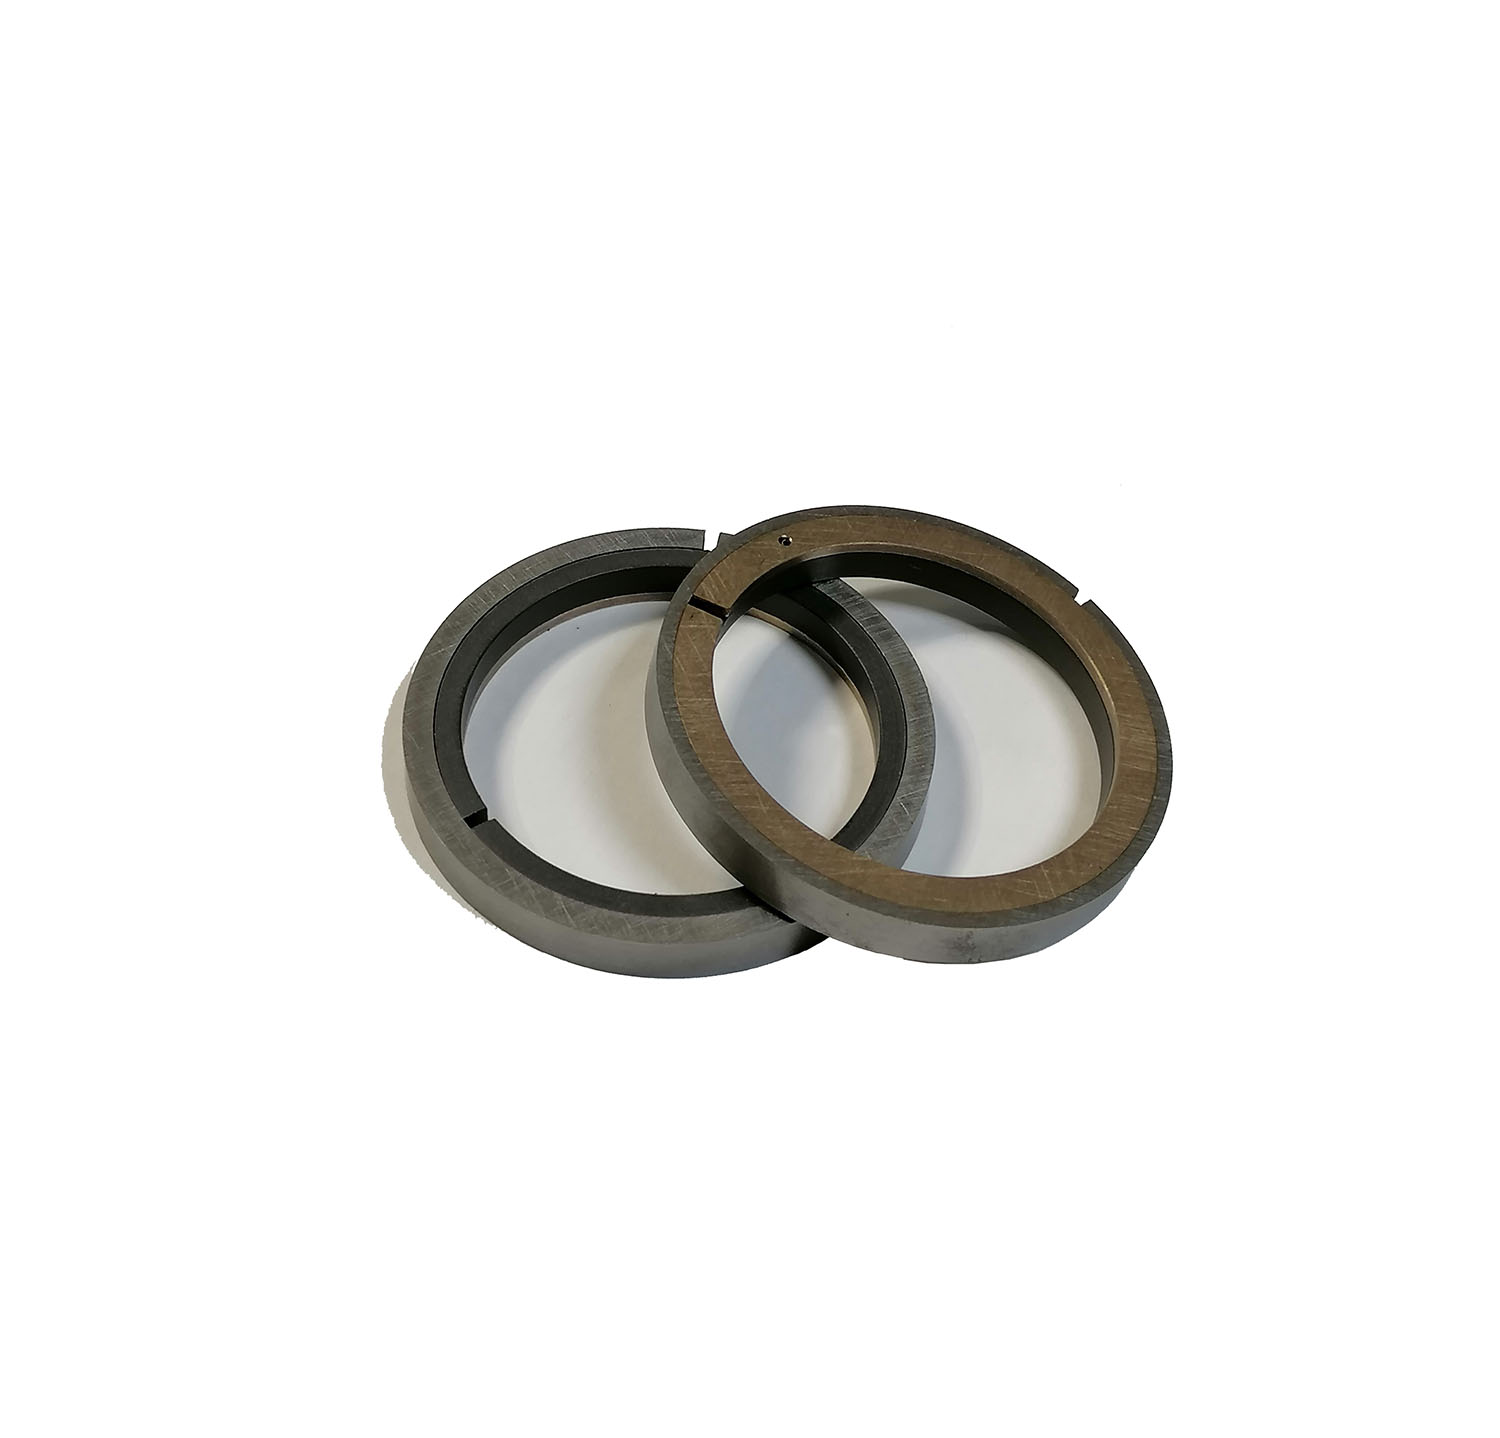 Purchase replacement rings for ABC compressors. Talleres Haizea manufactures and sells sealing rings, scrapers pressure breakers and anti heat rings for the maintenance of air compressors